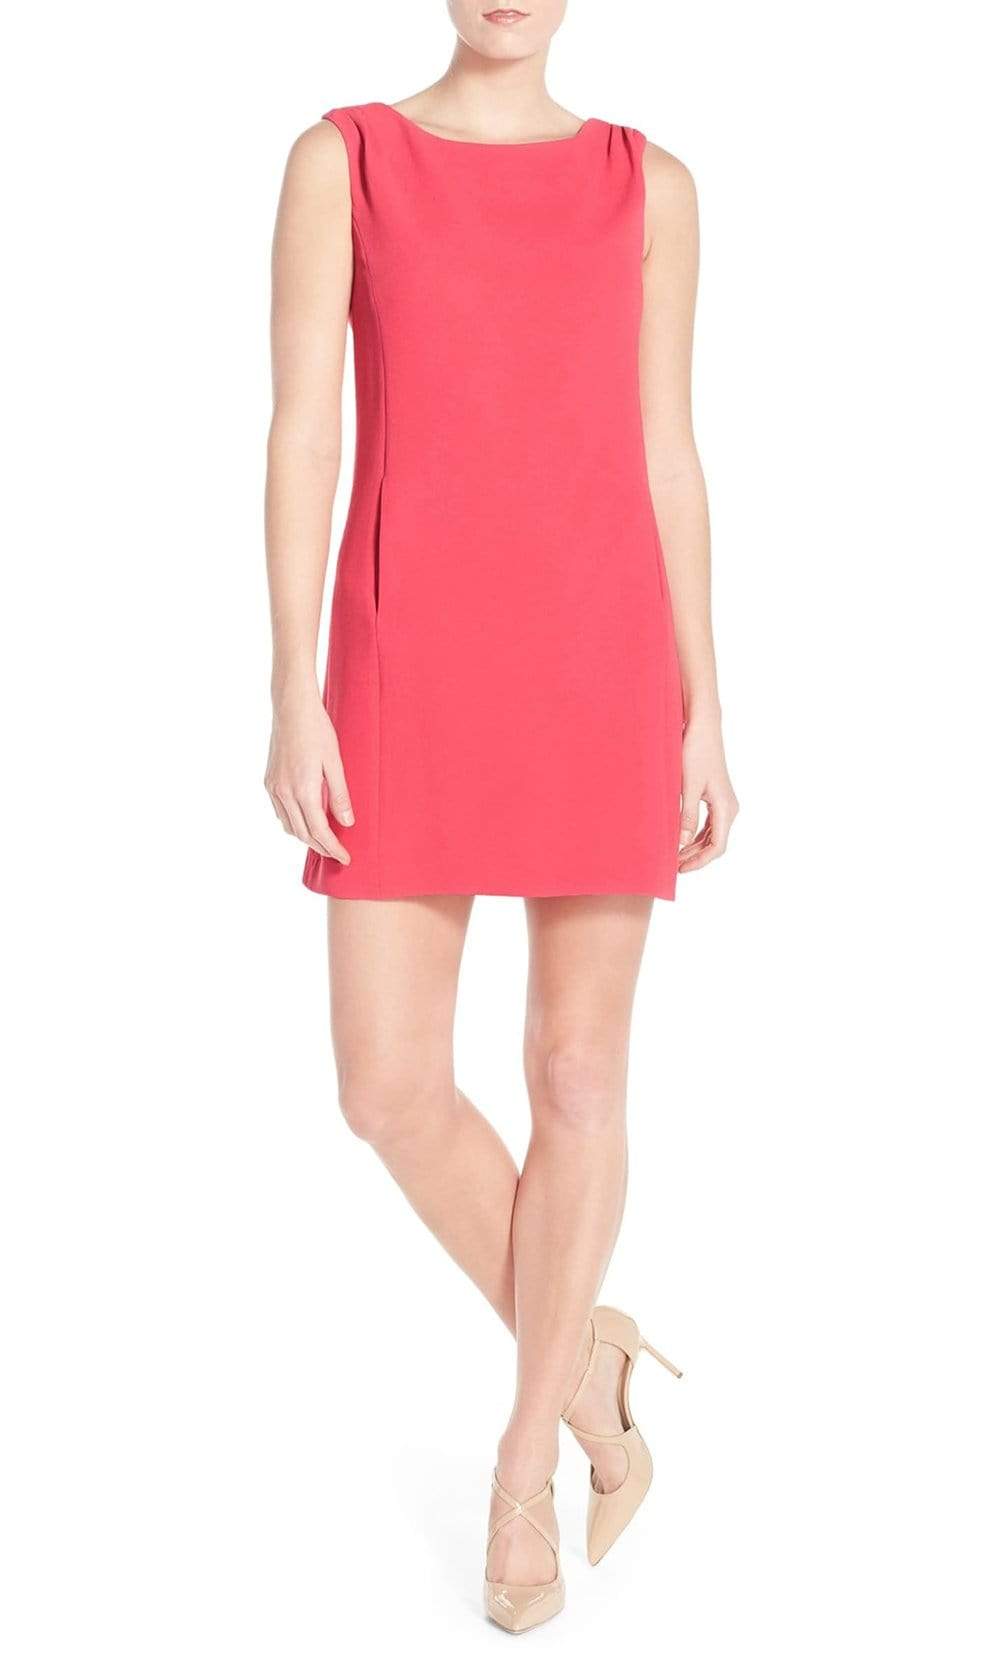 Image of Adrianna Papell - 11247300 Sleeveless Zipper Back Solid Crepe Dress